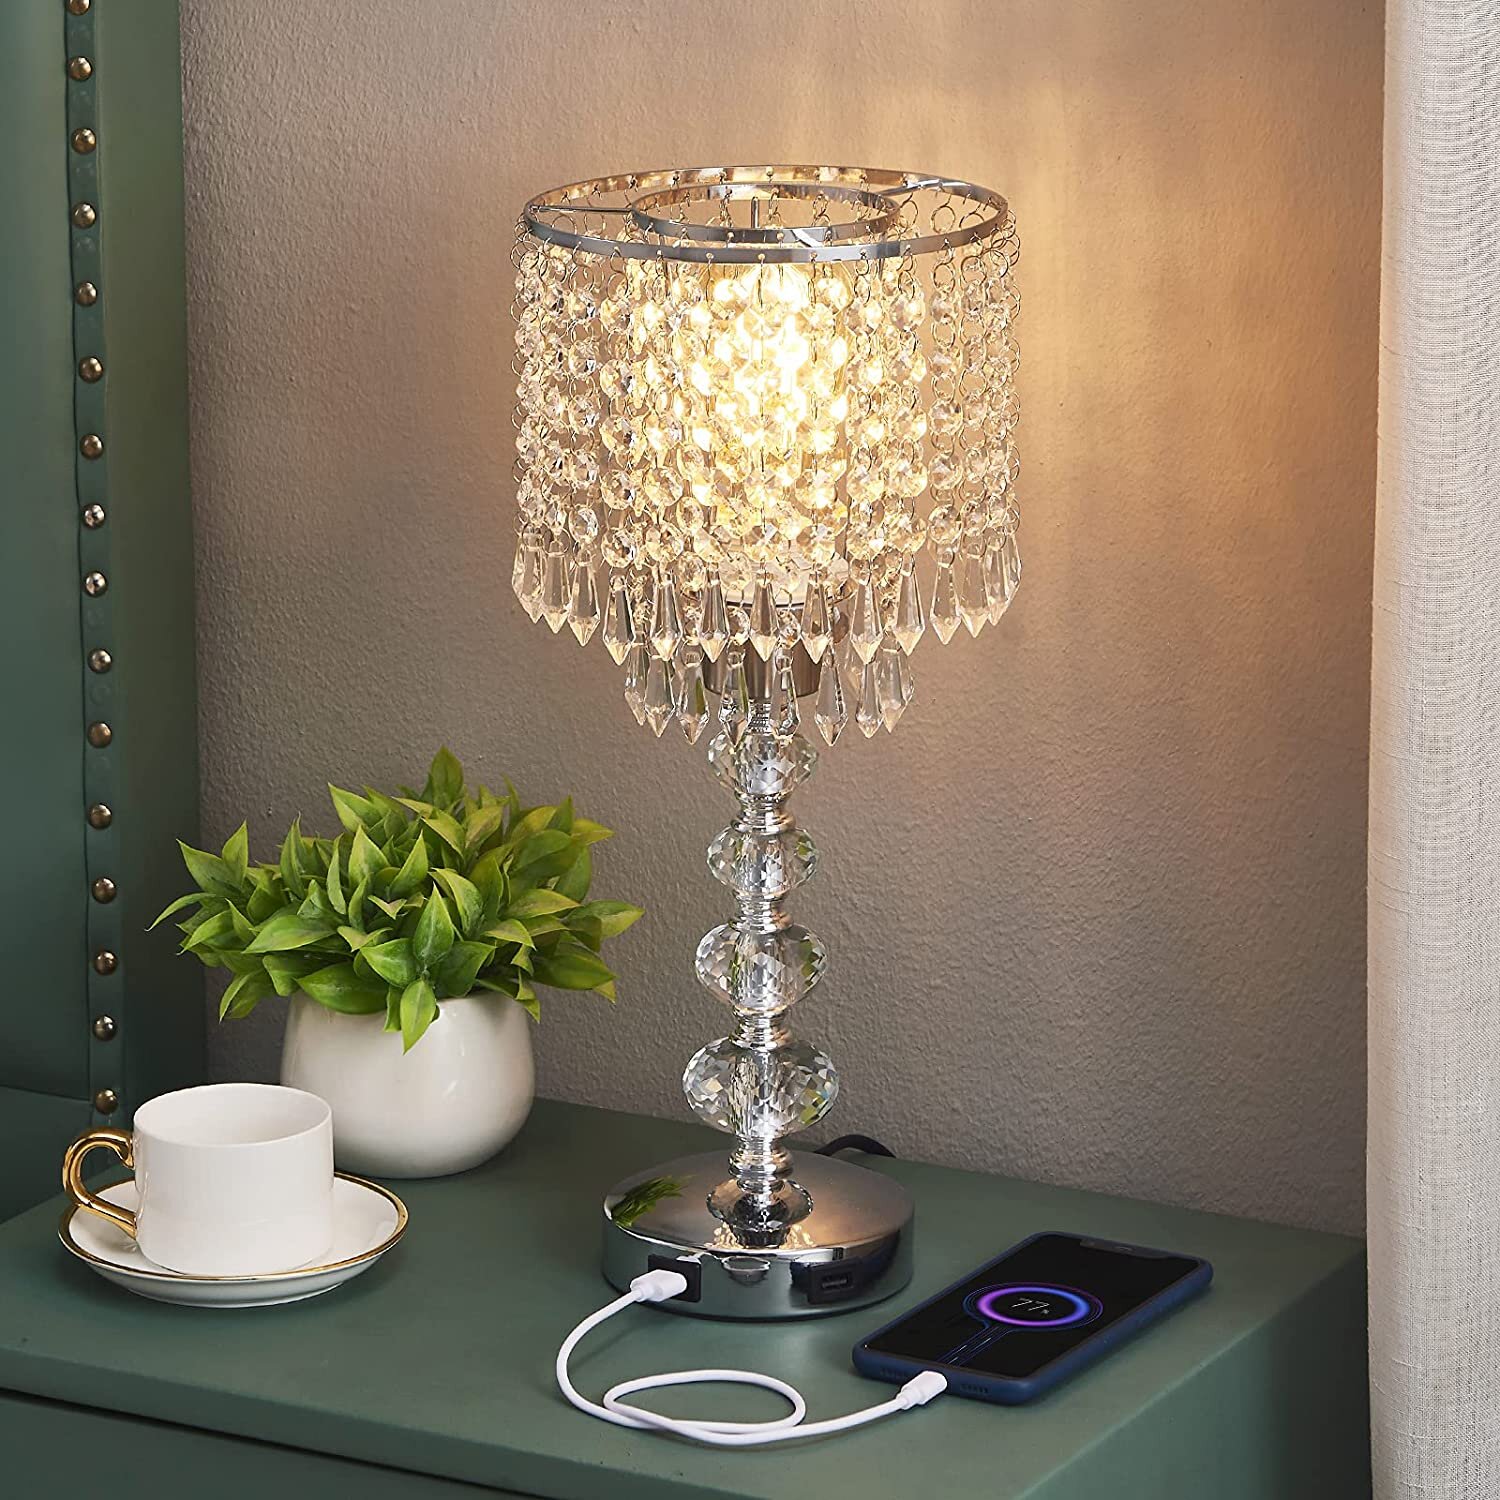 Living Room Ideal Gifts Dresser Table Decorative Round Nightstand Lamp Perfect for Bedroom Crystal USB Table Lamp Aooshine Modern Design Crystal Bedside Table Lamp with USB Charging Port Sliver 